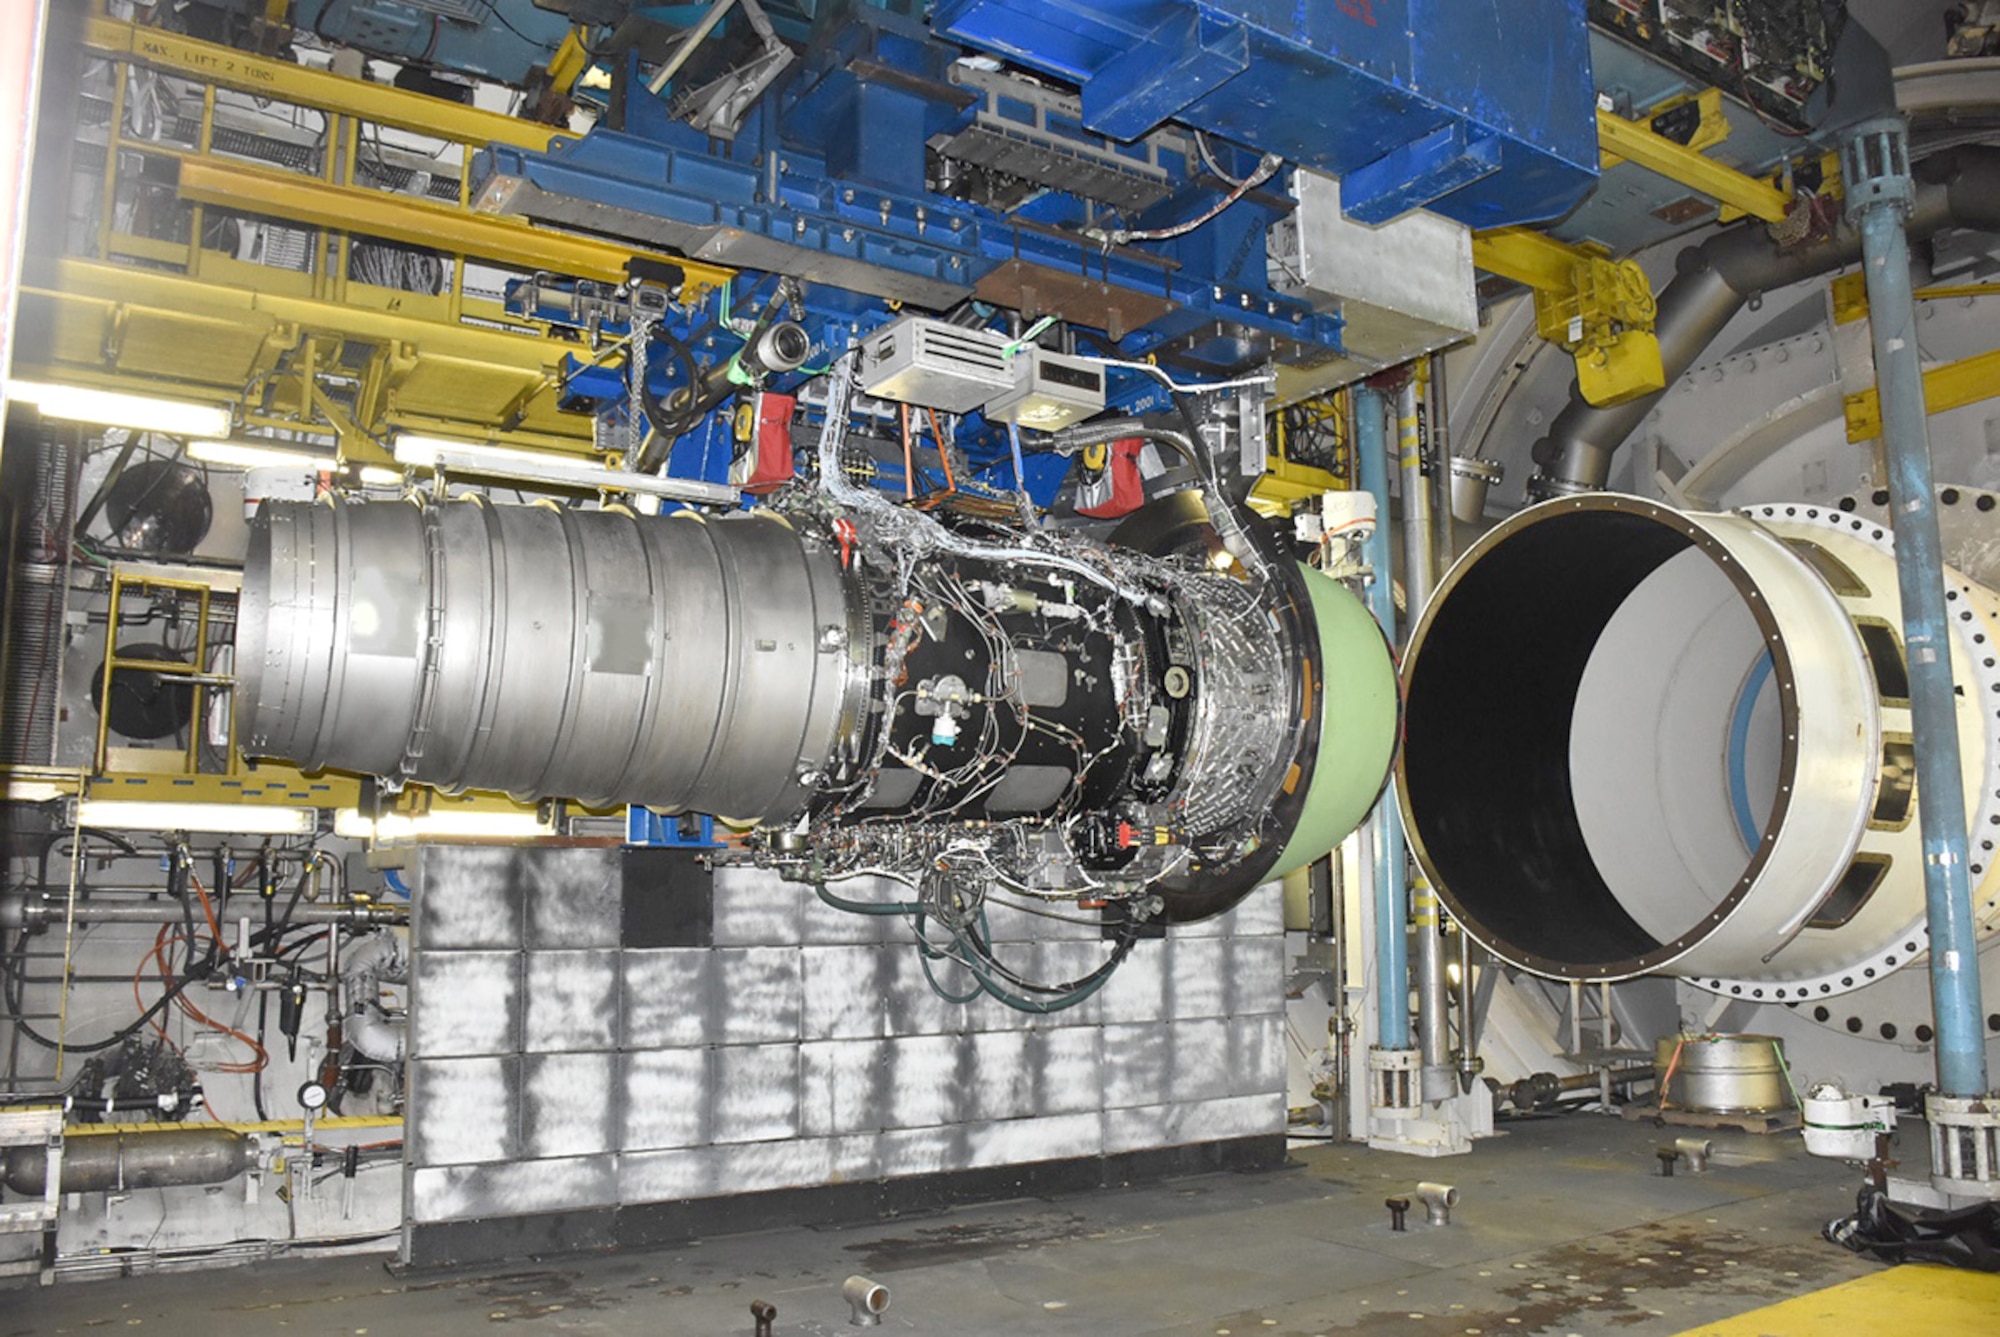 The Rolls-Royce engine is set up here in free-jet mode inside the AEDC C-2 test cell at Arnold Air Force Base. Transonic speeds with large volumetric flow rates were recently achieved during free-jet testing of this high-bypass engine, setting a record for free-jet mode engine testing. (U.S. Air Force photo)